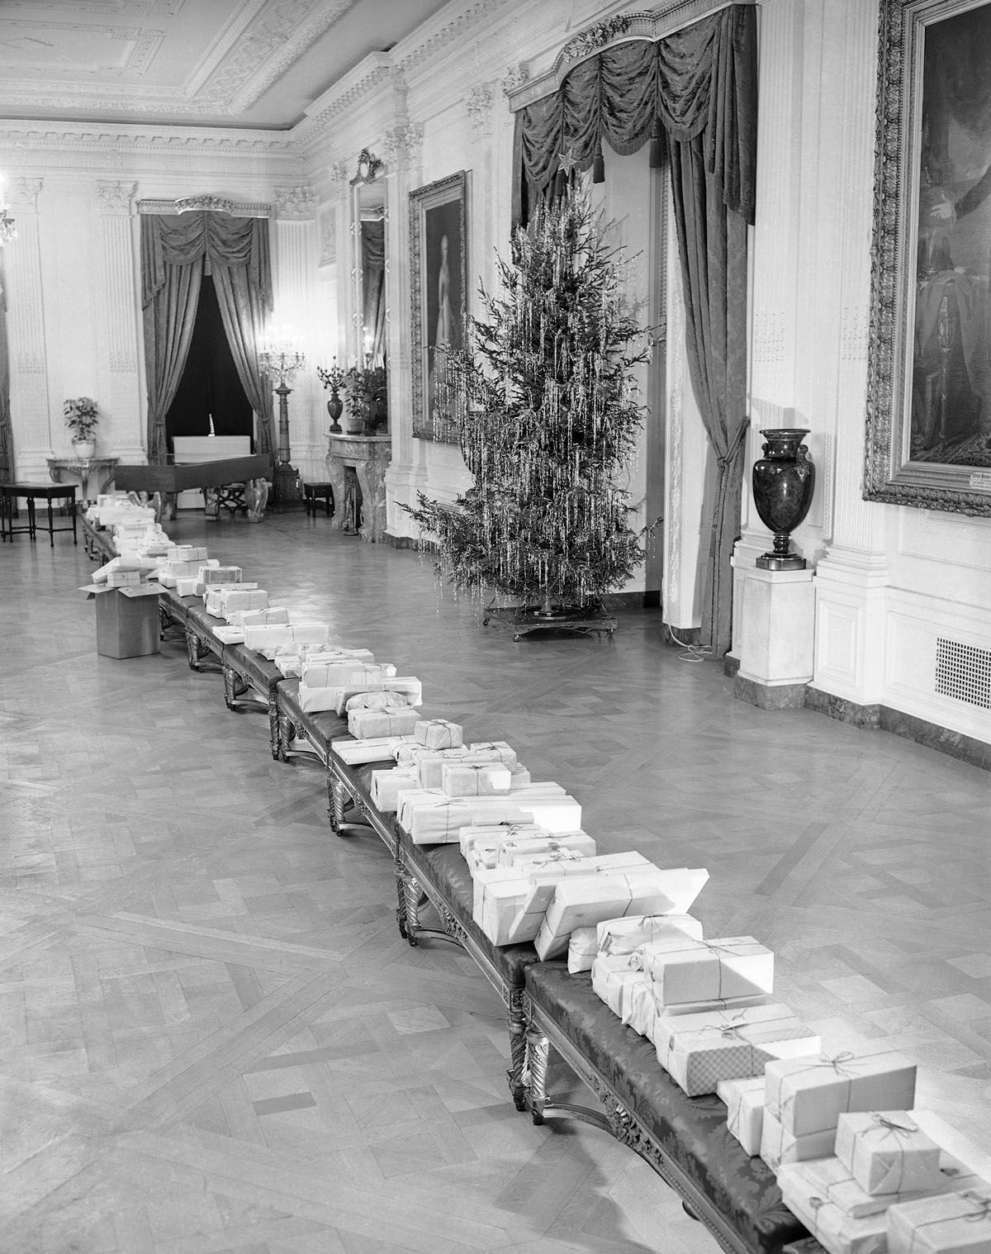 These packages, placed on benches in the East Room of the White House in Washington on Dec. 23, 1942, will be distributed by President and Mrs. Franklin Roosevelt to younger children of White House employees on Christmas Eve. The gifts all will go to children under 12. (AP Photo/George R. Skadding)